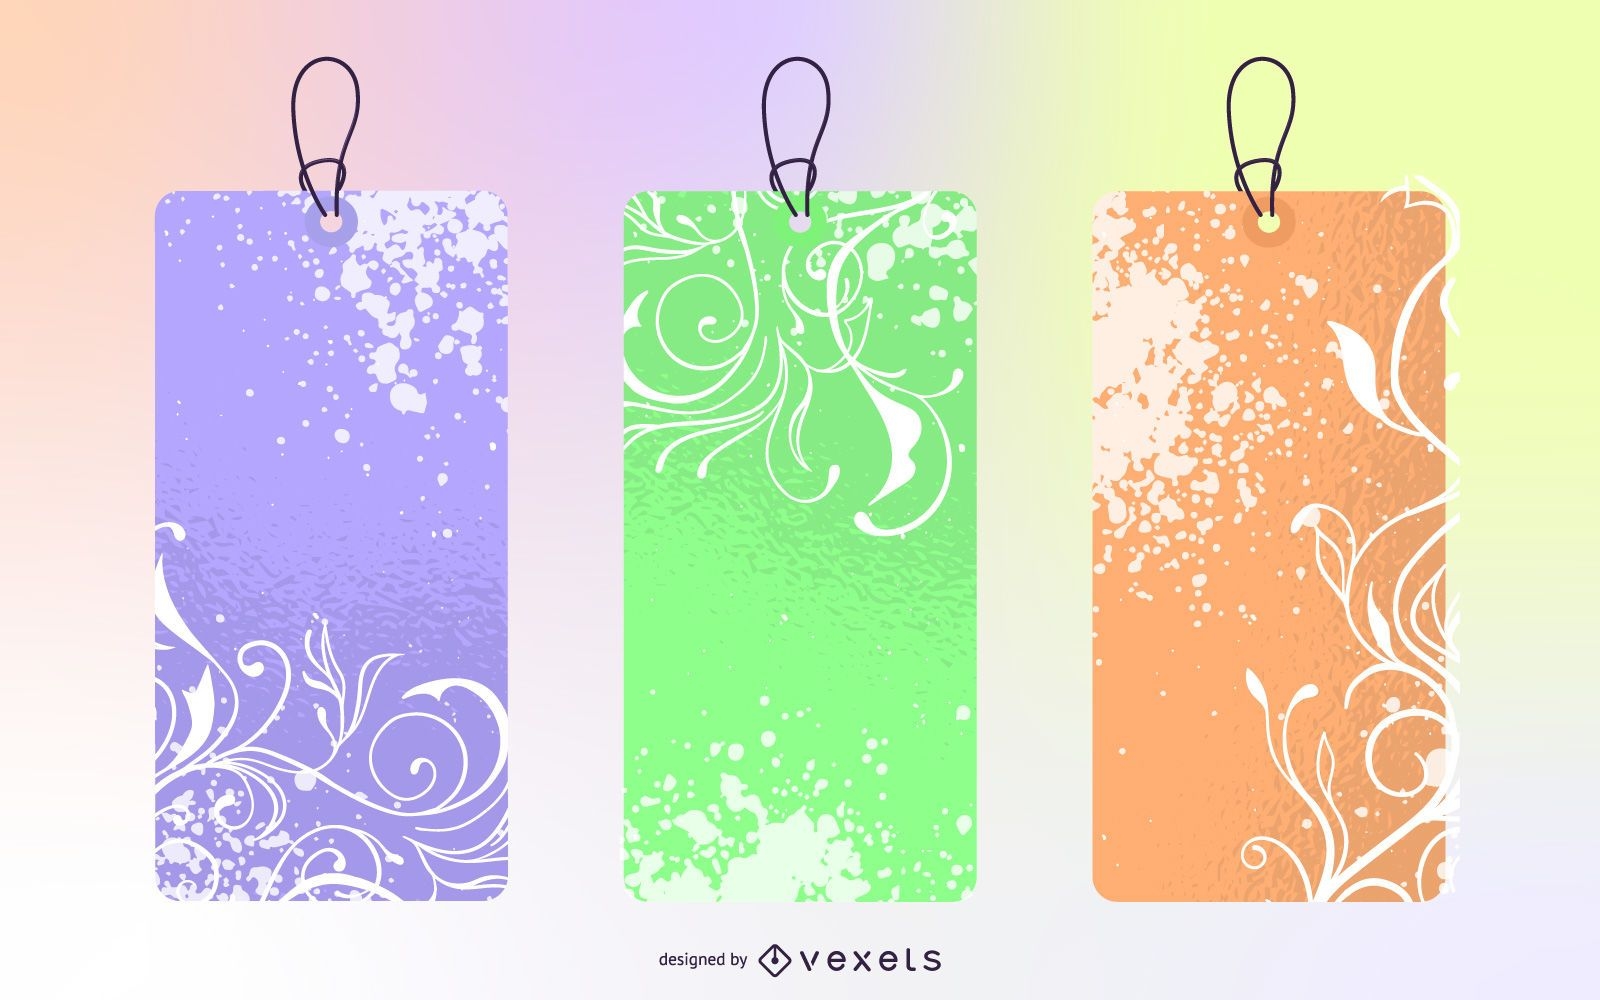 Vector Flowered Grunge Labels I and II